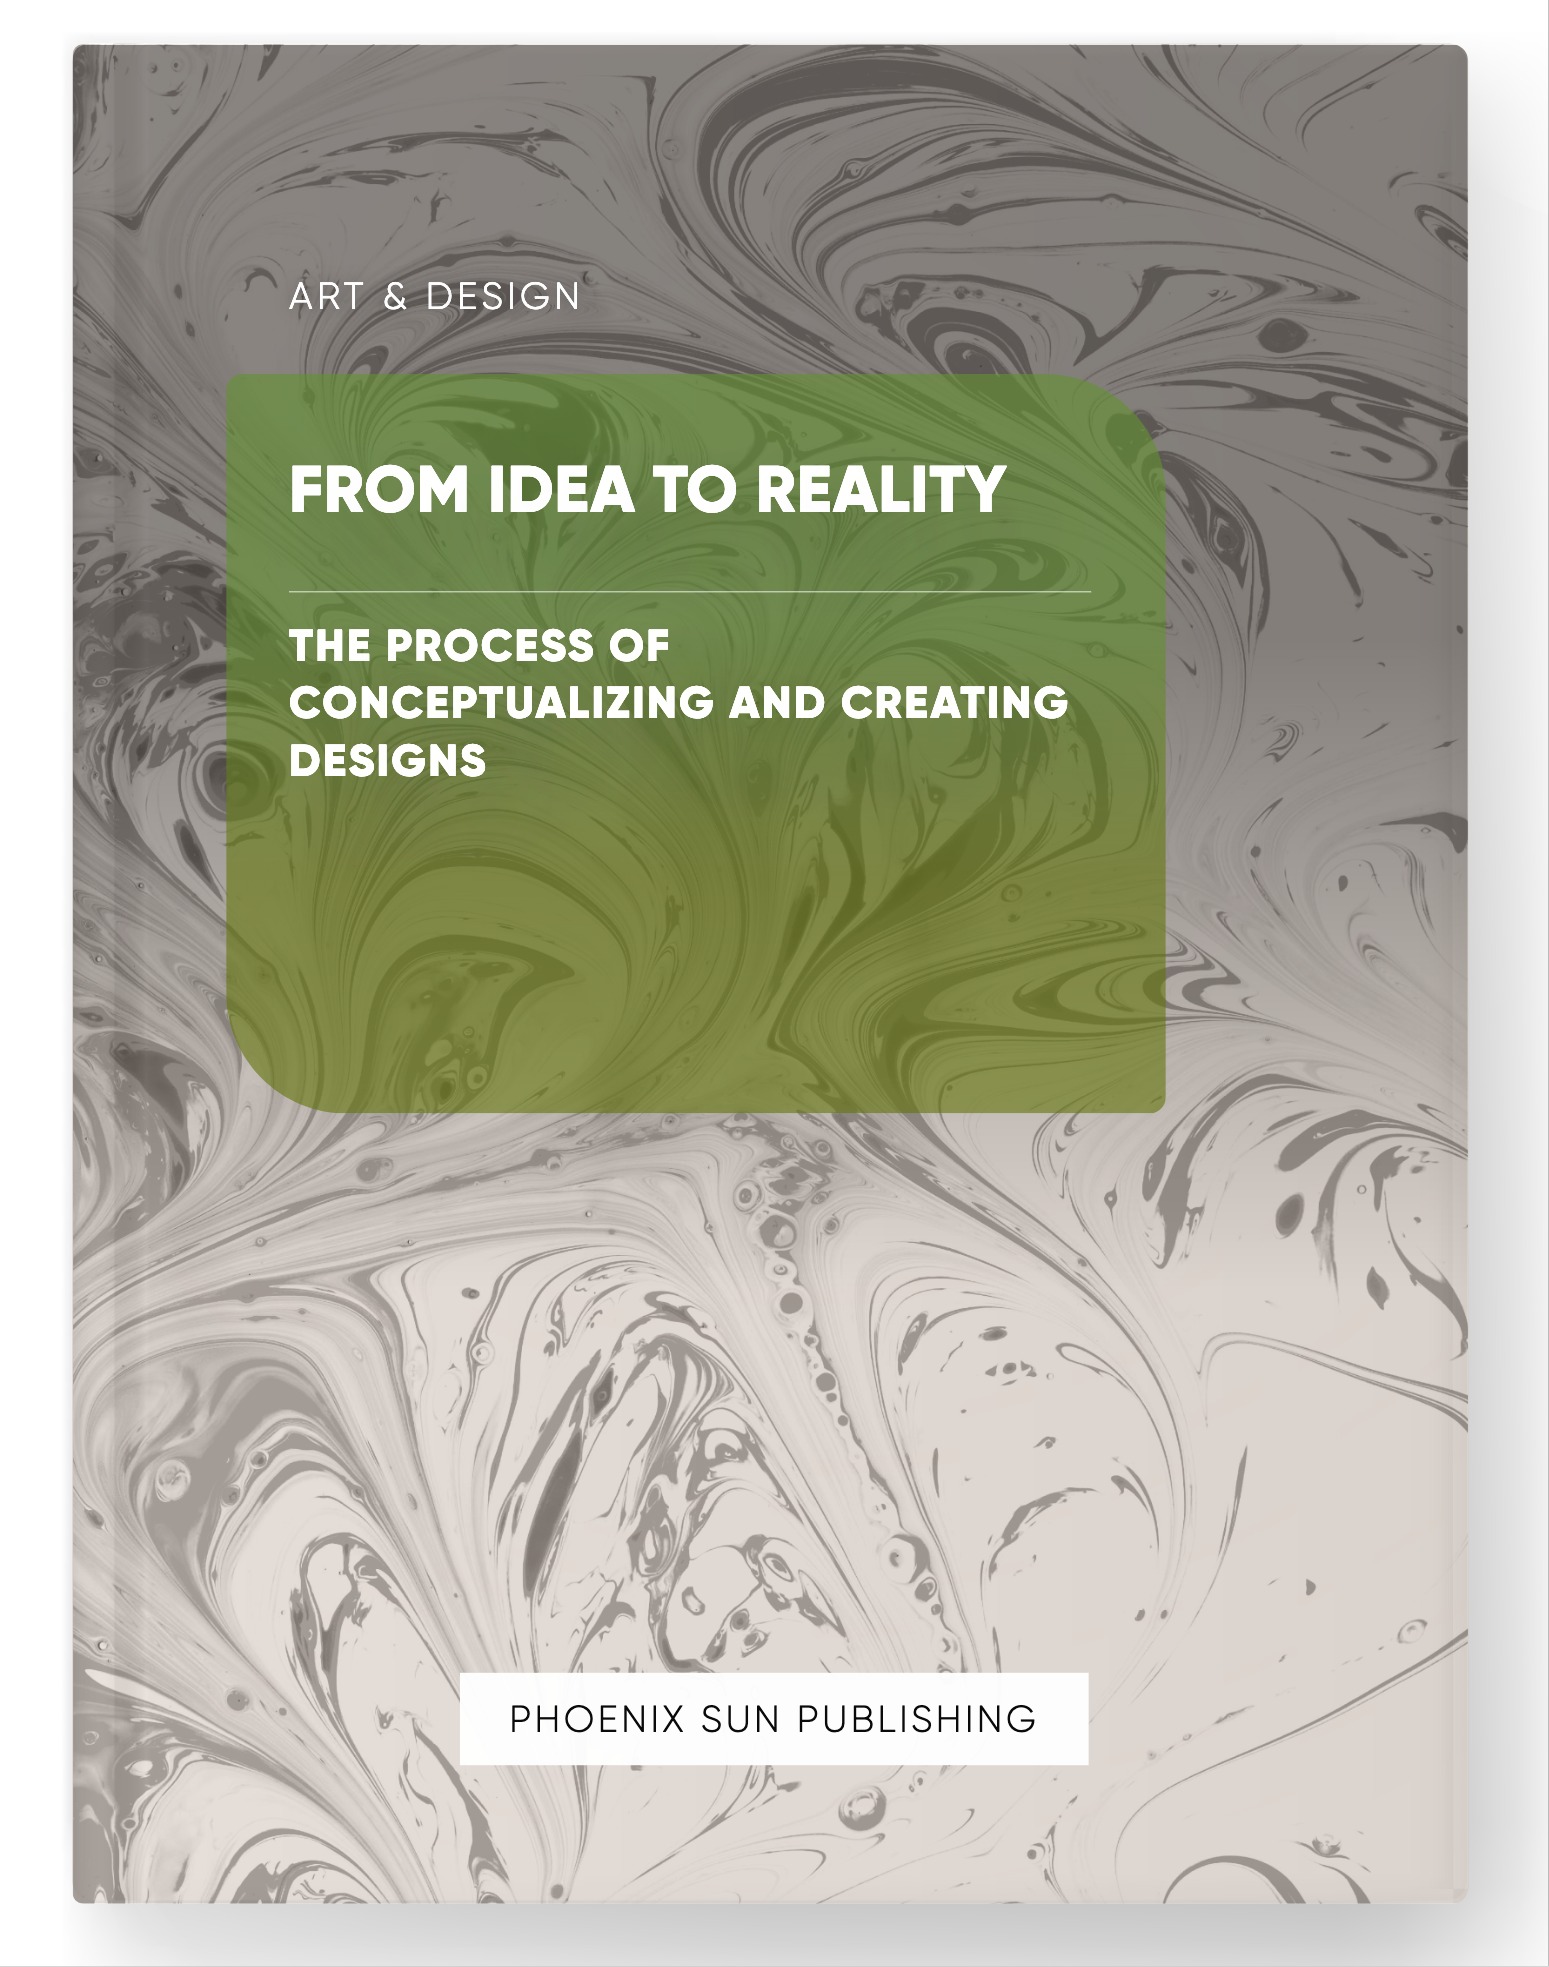 From Idea to Reality – The Process of Conceptualizing and Creating Designs